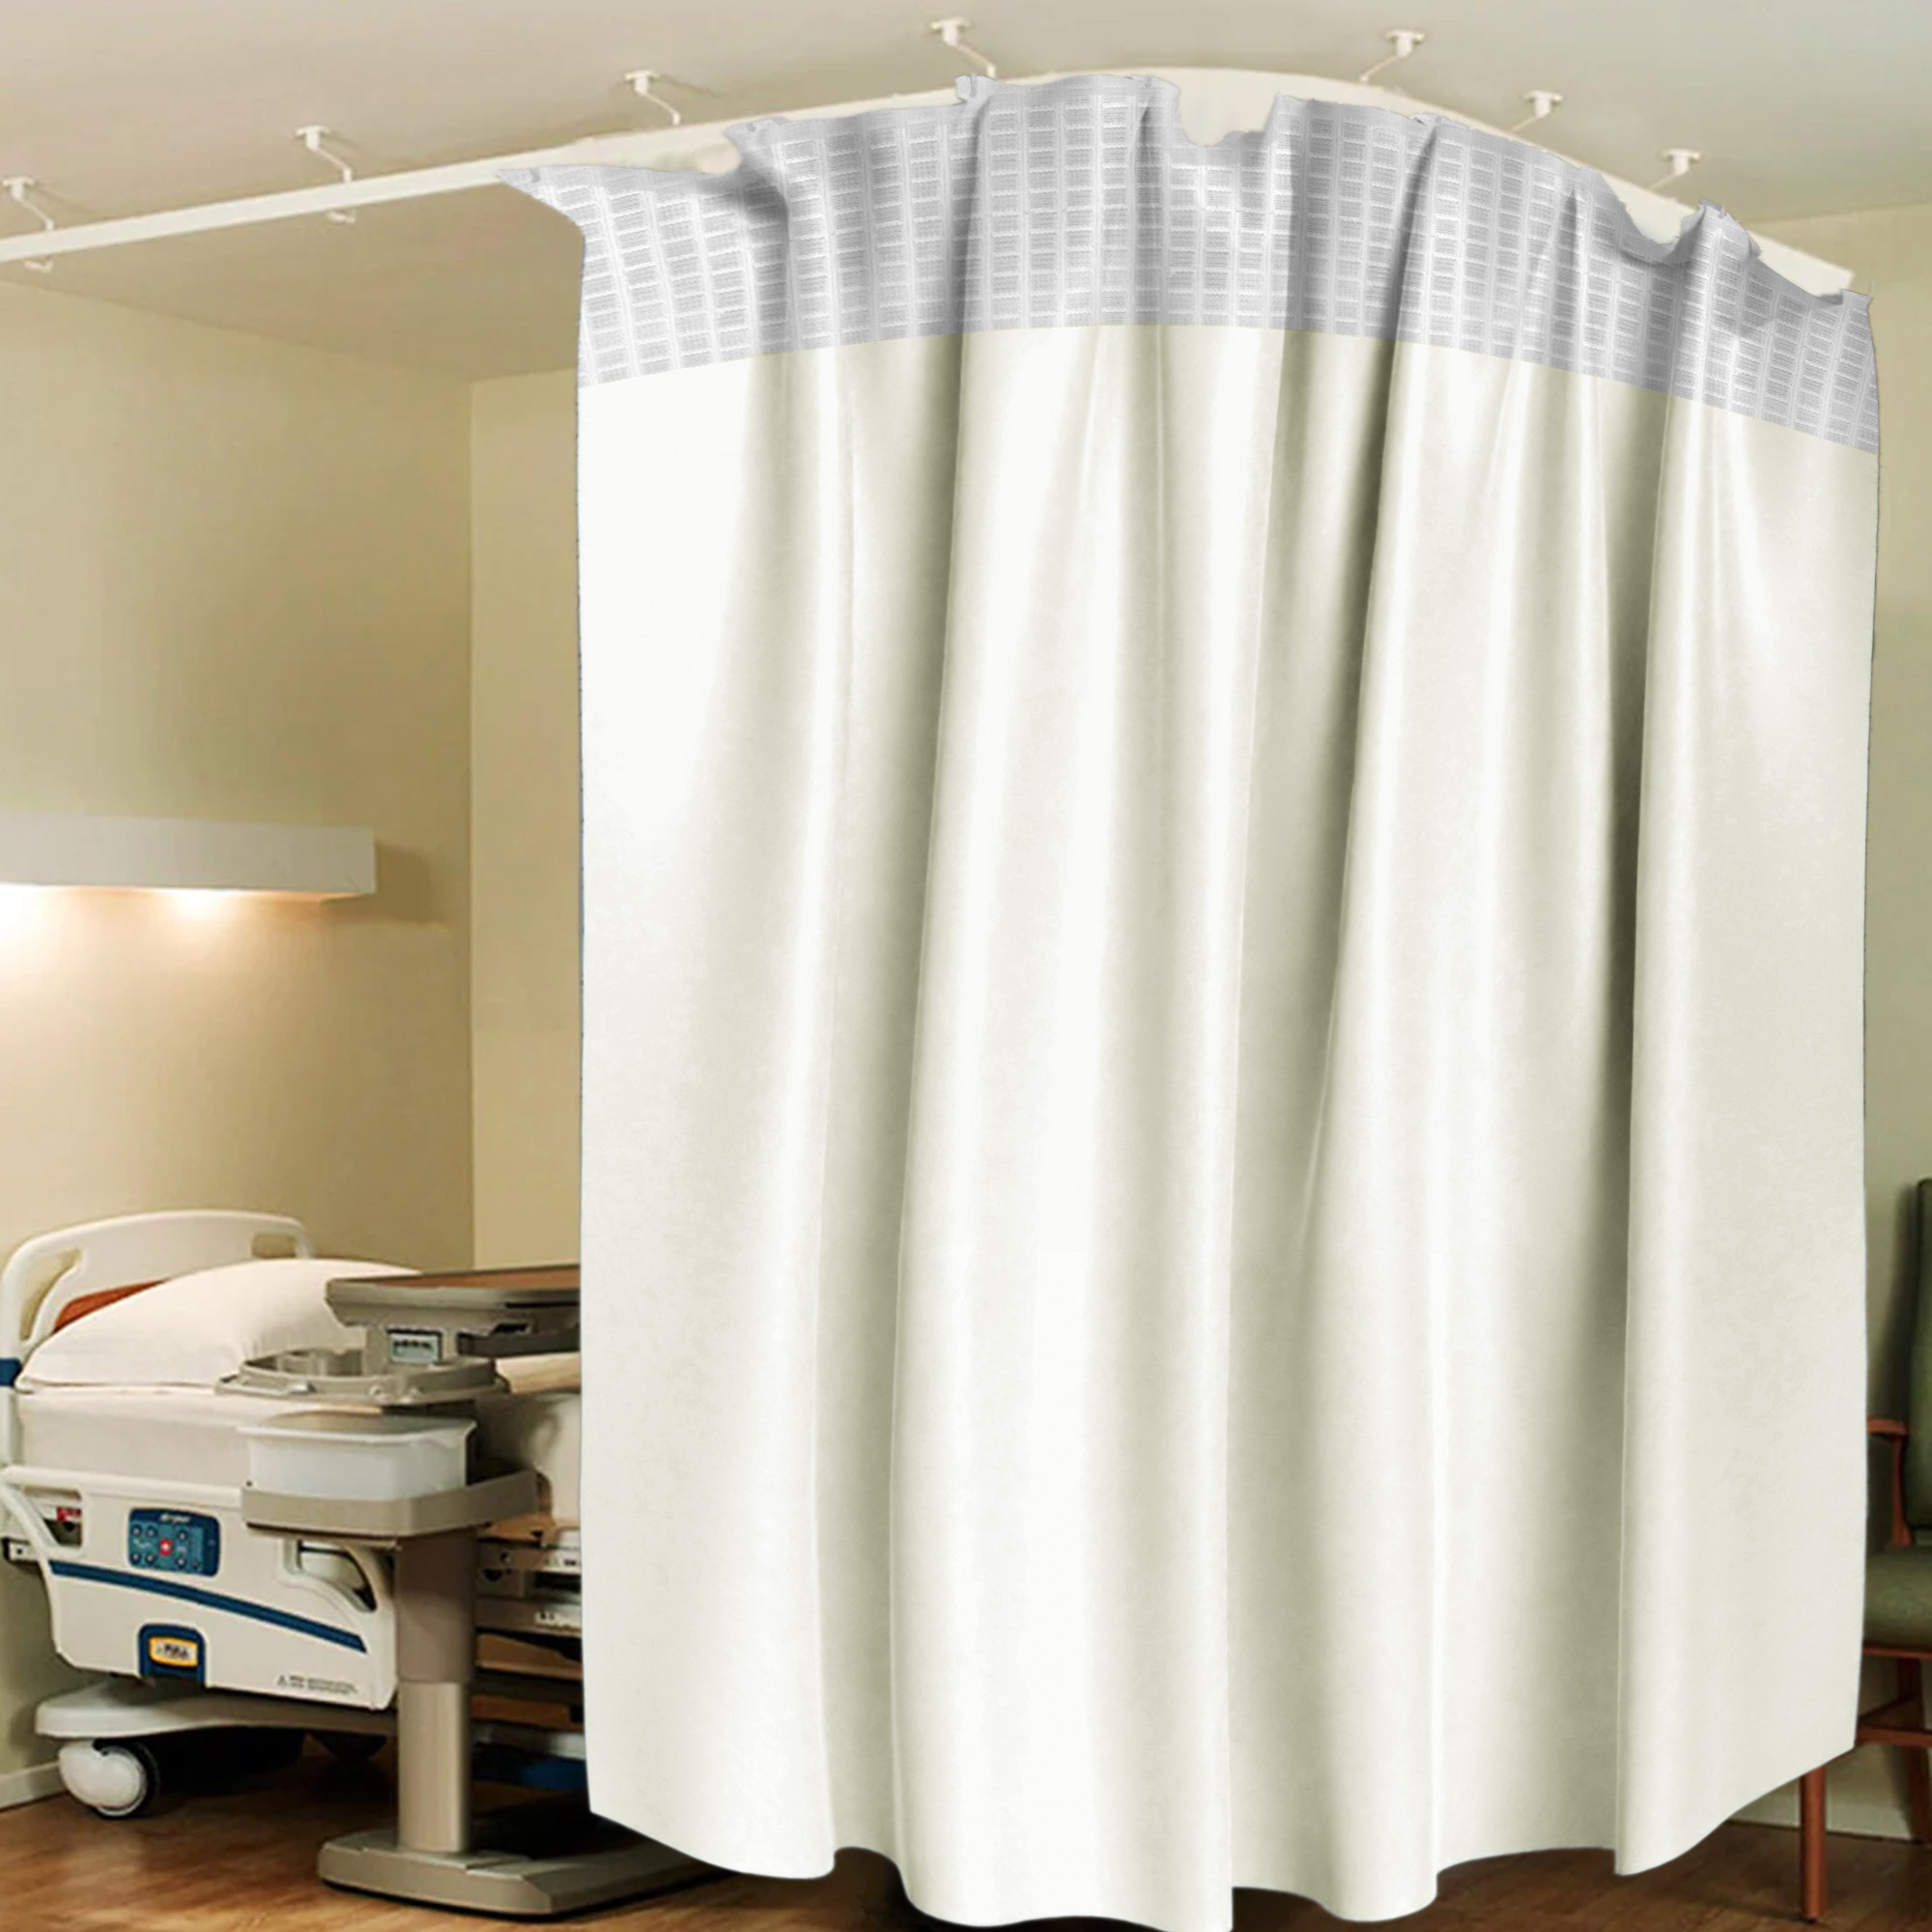 Kuber Industries AC Curtain | PVC Hospital Bed Curtain | Curtains for Hospital | Curtain for Bathroom | Window Blackout Curtain | Shower Curtain with 8 Rings | 7 Feet | Cream